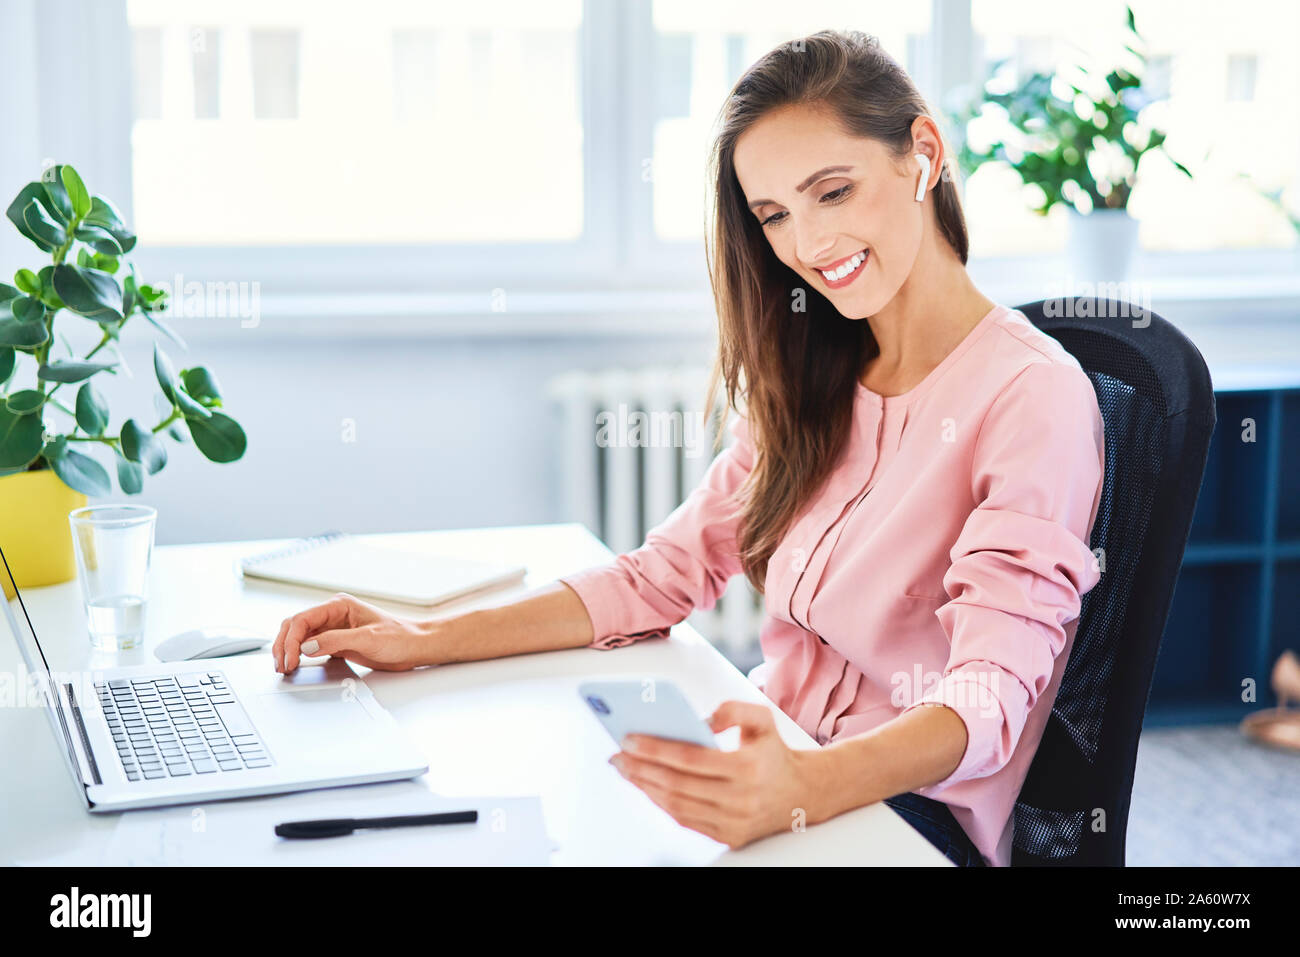 Young businesswoman checking phone while working on laptop in office Stock Photo